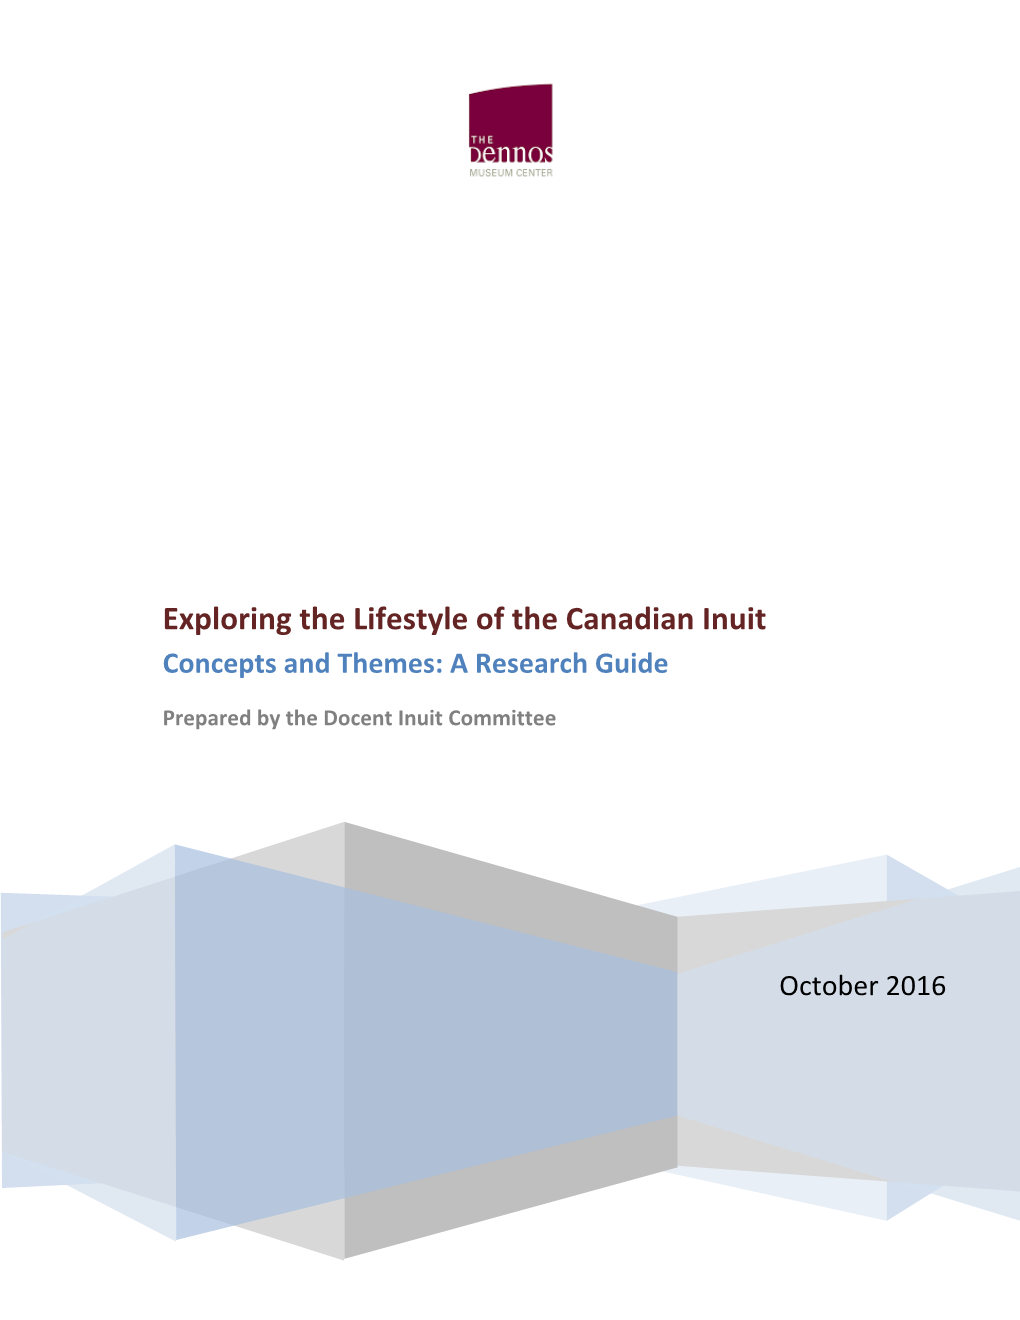 Exploring the Lifestyle of the Canadian Inuit Concepts and Themes: a Research Guide